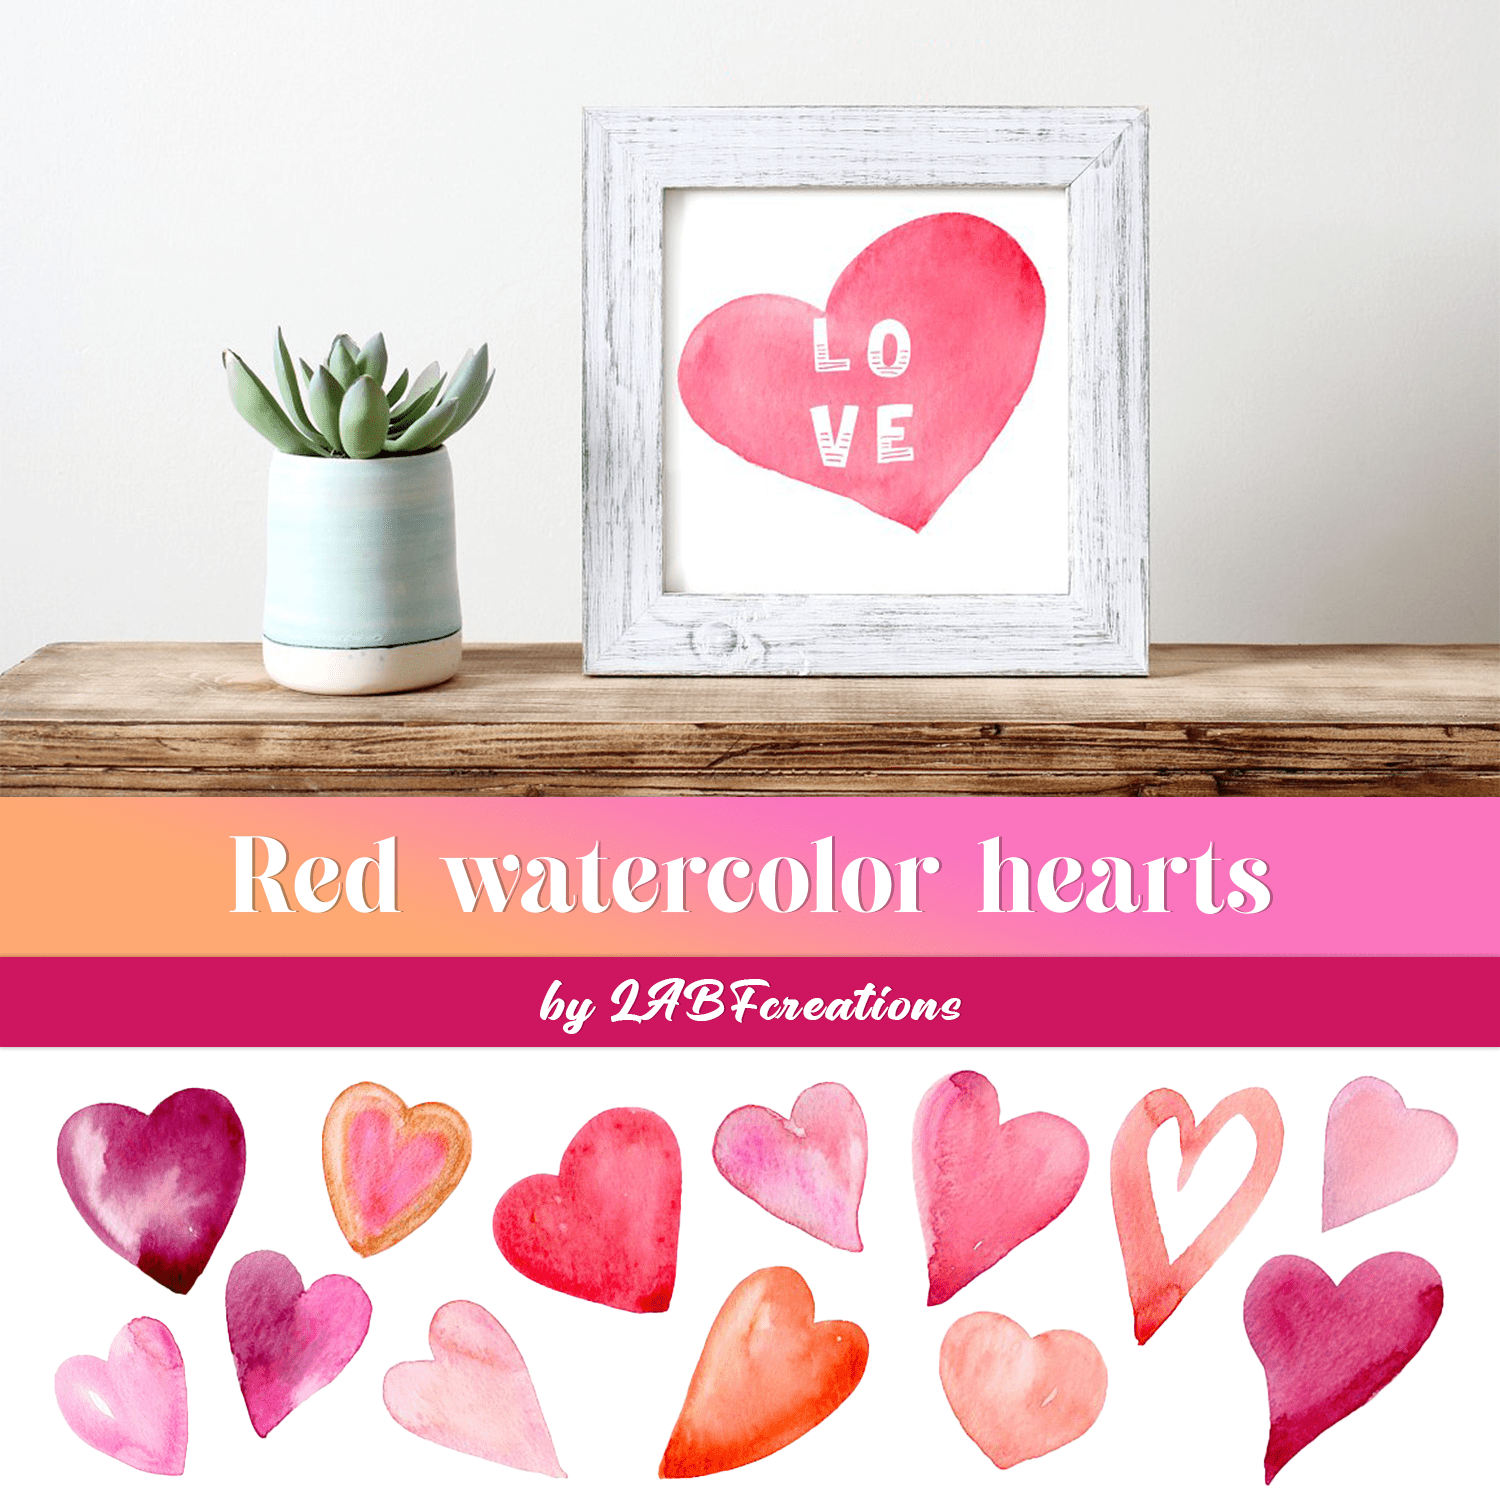 Red watercolor hearts by LABFcreations.